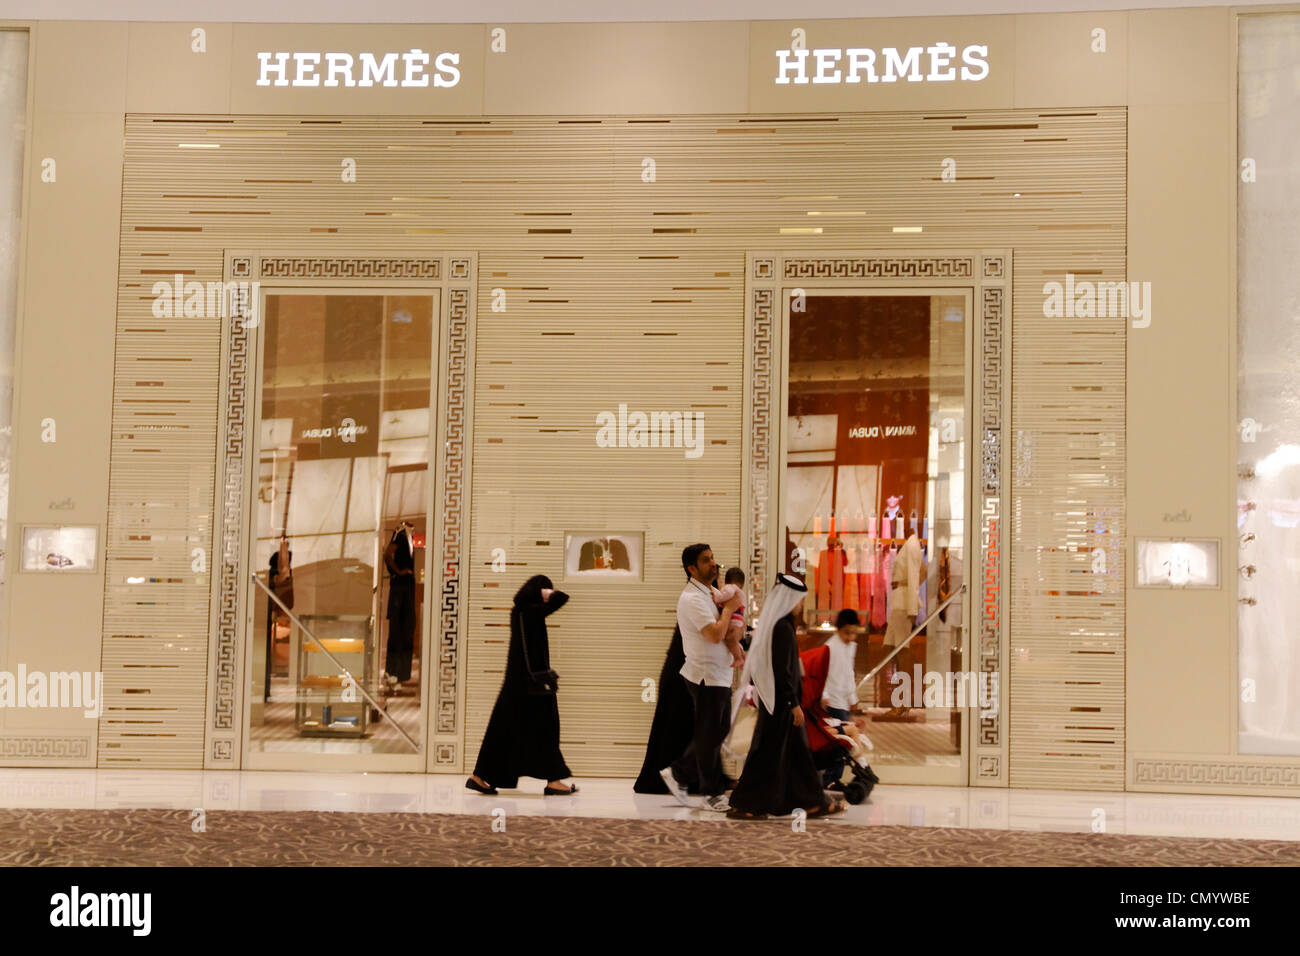 hermes mall of the emirates number